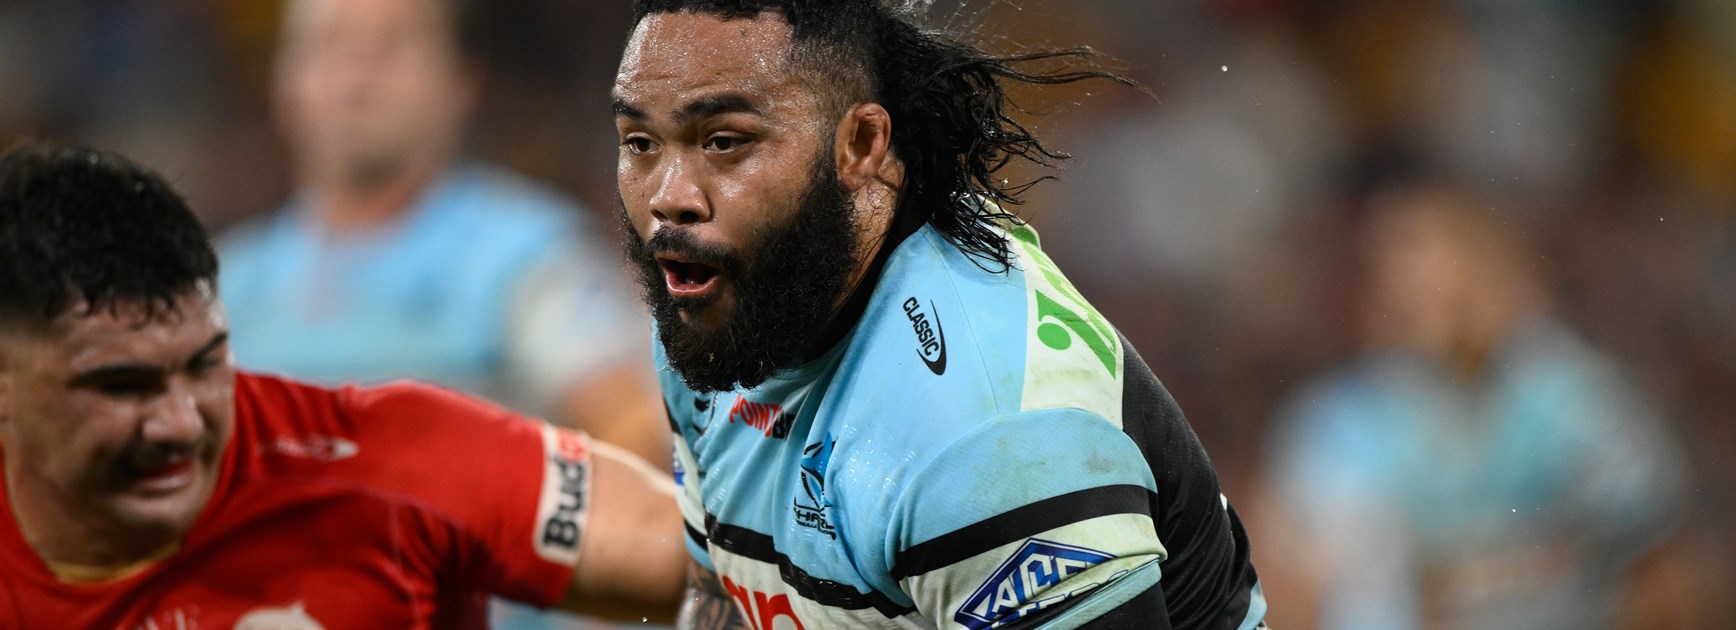 Talakai looking for improvement as Sharks regroup for Manly clash